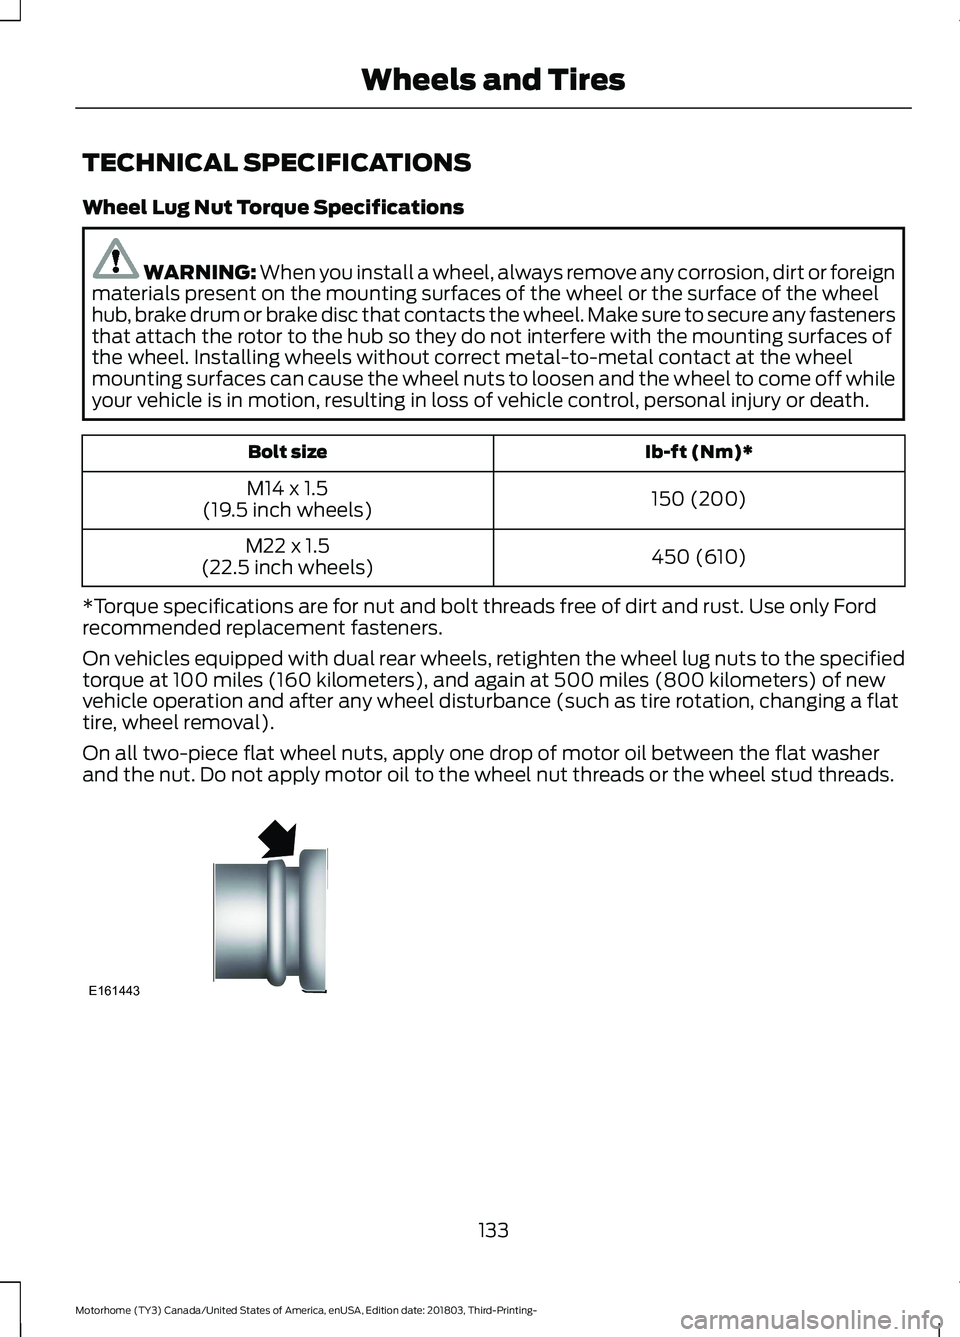 FORD F-59 2019  Owners Manual TECHNICAL SPECIFICATIONS
Wheel Lug Nut Torque Specifications
WARNING: When you install a wheel, always remove any corrosion, dirt or foreignmaterials present on the mounting surfaces of the wheel or t